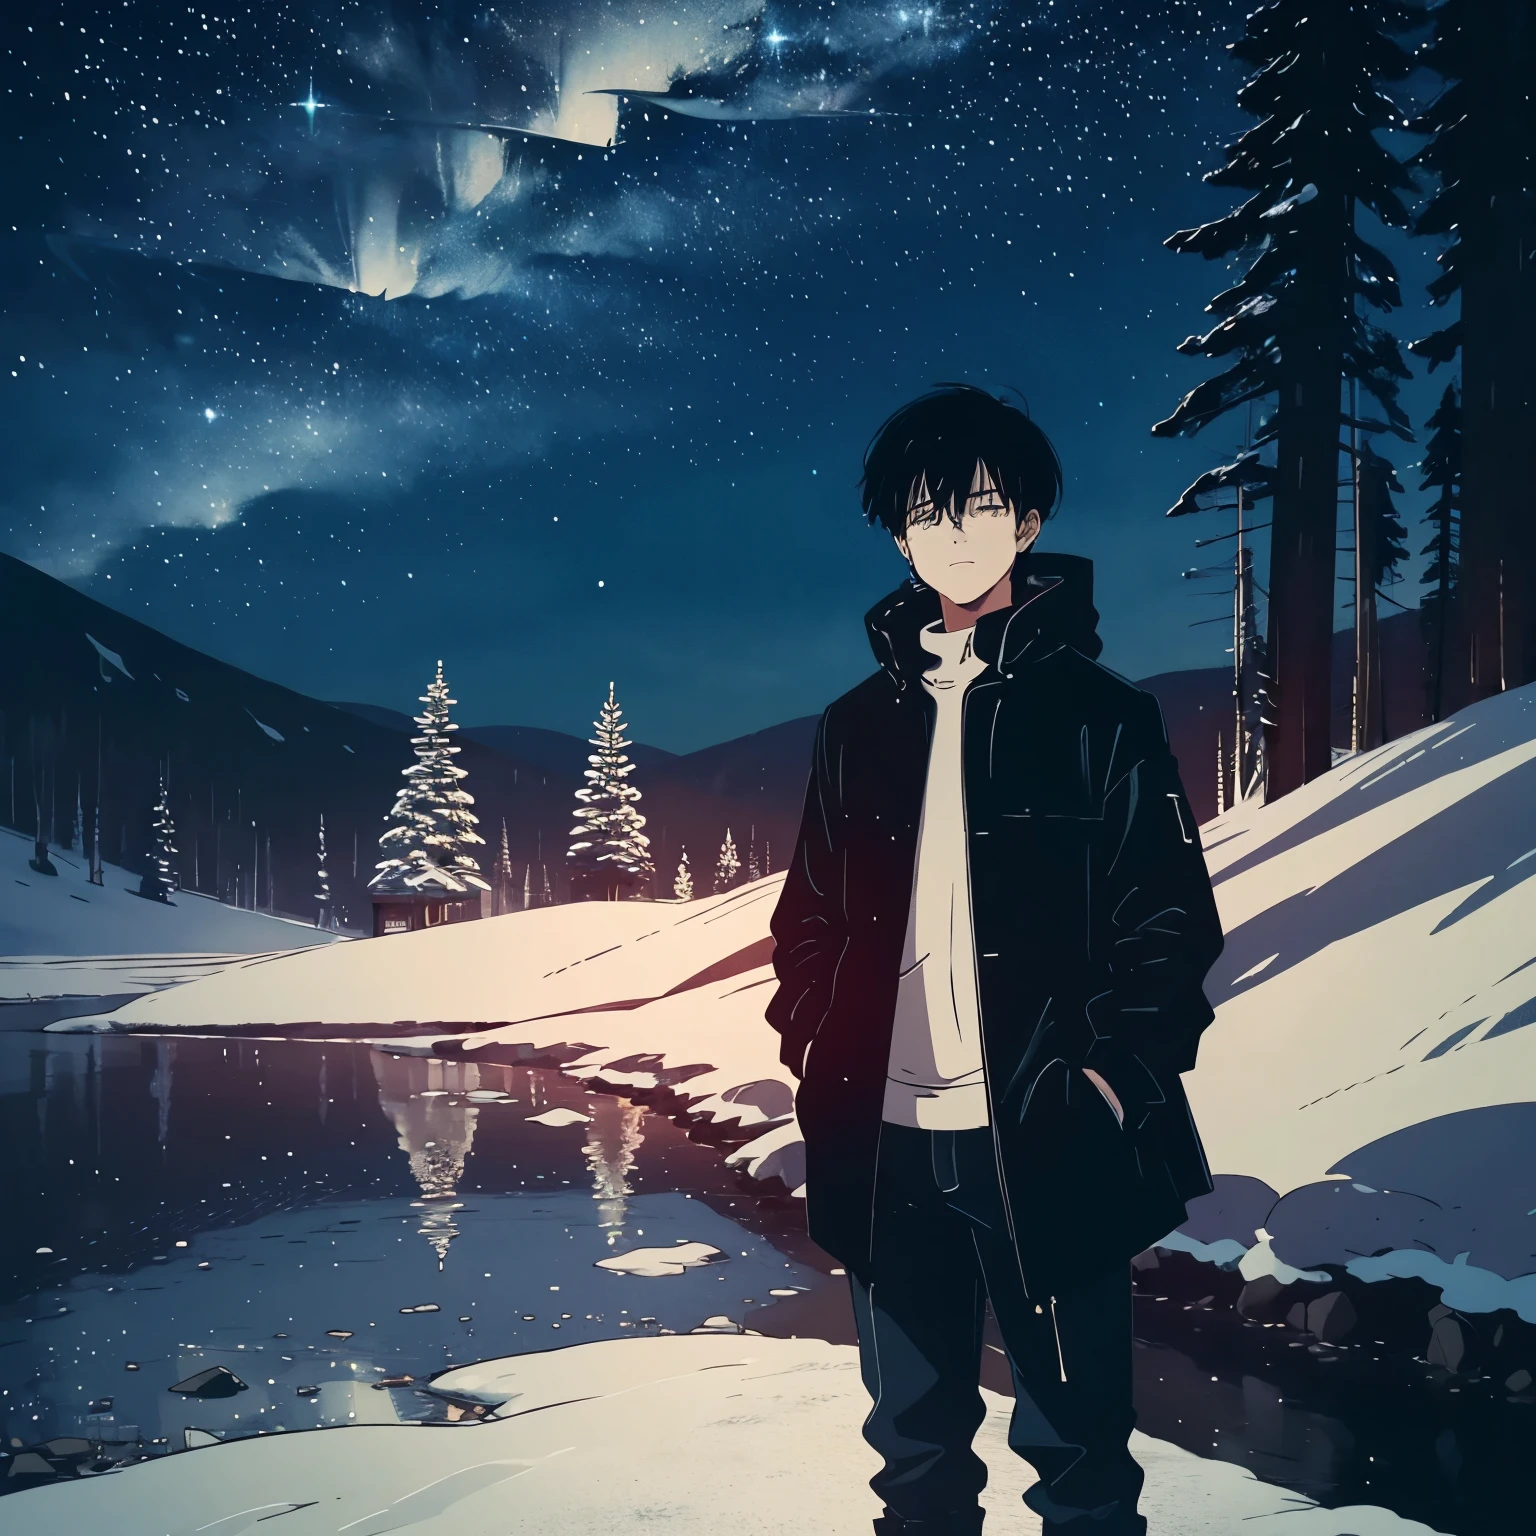 A boy in a black puff jacket and baggy pants standing in a winter landscape at night. The sky is filled with shining stars, creating a magical atmosphere. The boy's jacket is warm and insulated, providing protection against the cold winter night. The landscape is covered in a thick layer of snow, with tall trees and rolling hills in the background. The stars twinkle brightly, casting a soft glow on the landscape. The boy is in awe of the beautiful scene, his breath visible in the chilly air. The winter night is serene and peaceful, creating a sense of tranquility. The cold air adds a crispness to the scene, making everything feel fresh and pure. The boy's black jacket contrasts with the white snow, adding a touch of boldness to the composition. The baggy pants give him a casual and comfortable look, allowing him to freely explore the wintry outdoors. Together, the elements create a captivating image that captures the beauty and wonder of a winter night landscape. (best quality, highres), realistic, landscape, night, stars, winter, black puff jacket, baggy pants